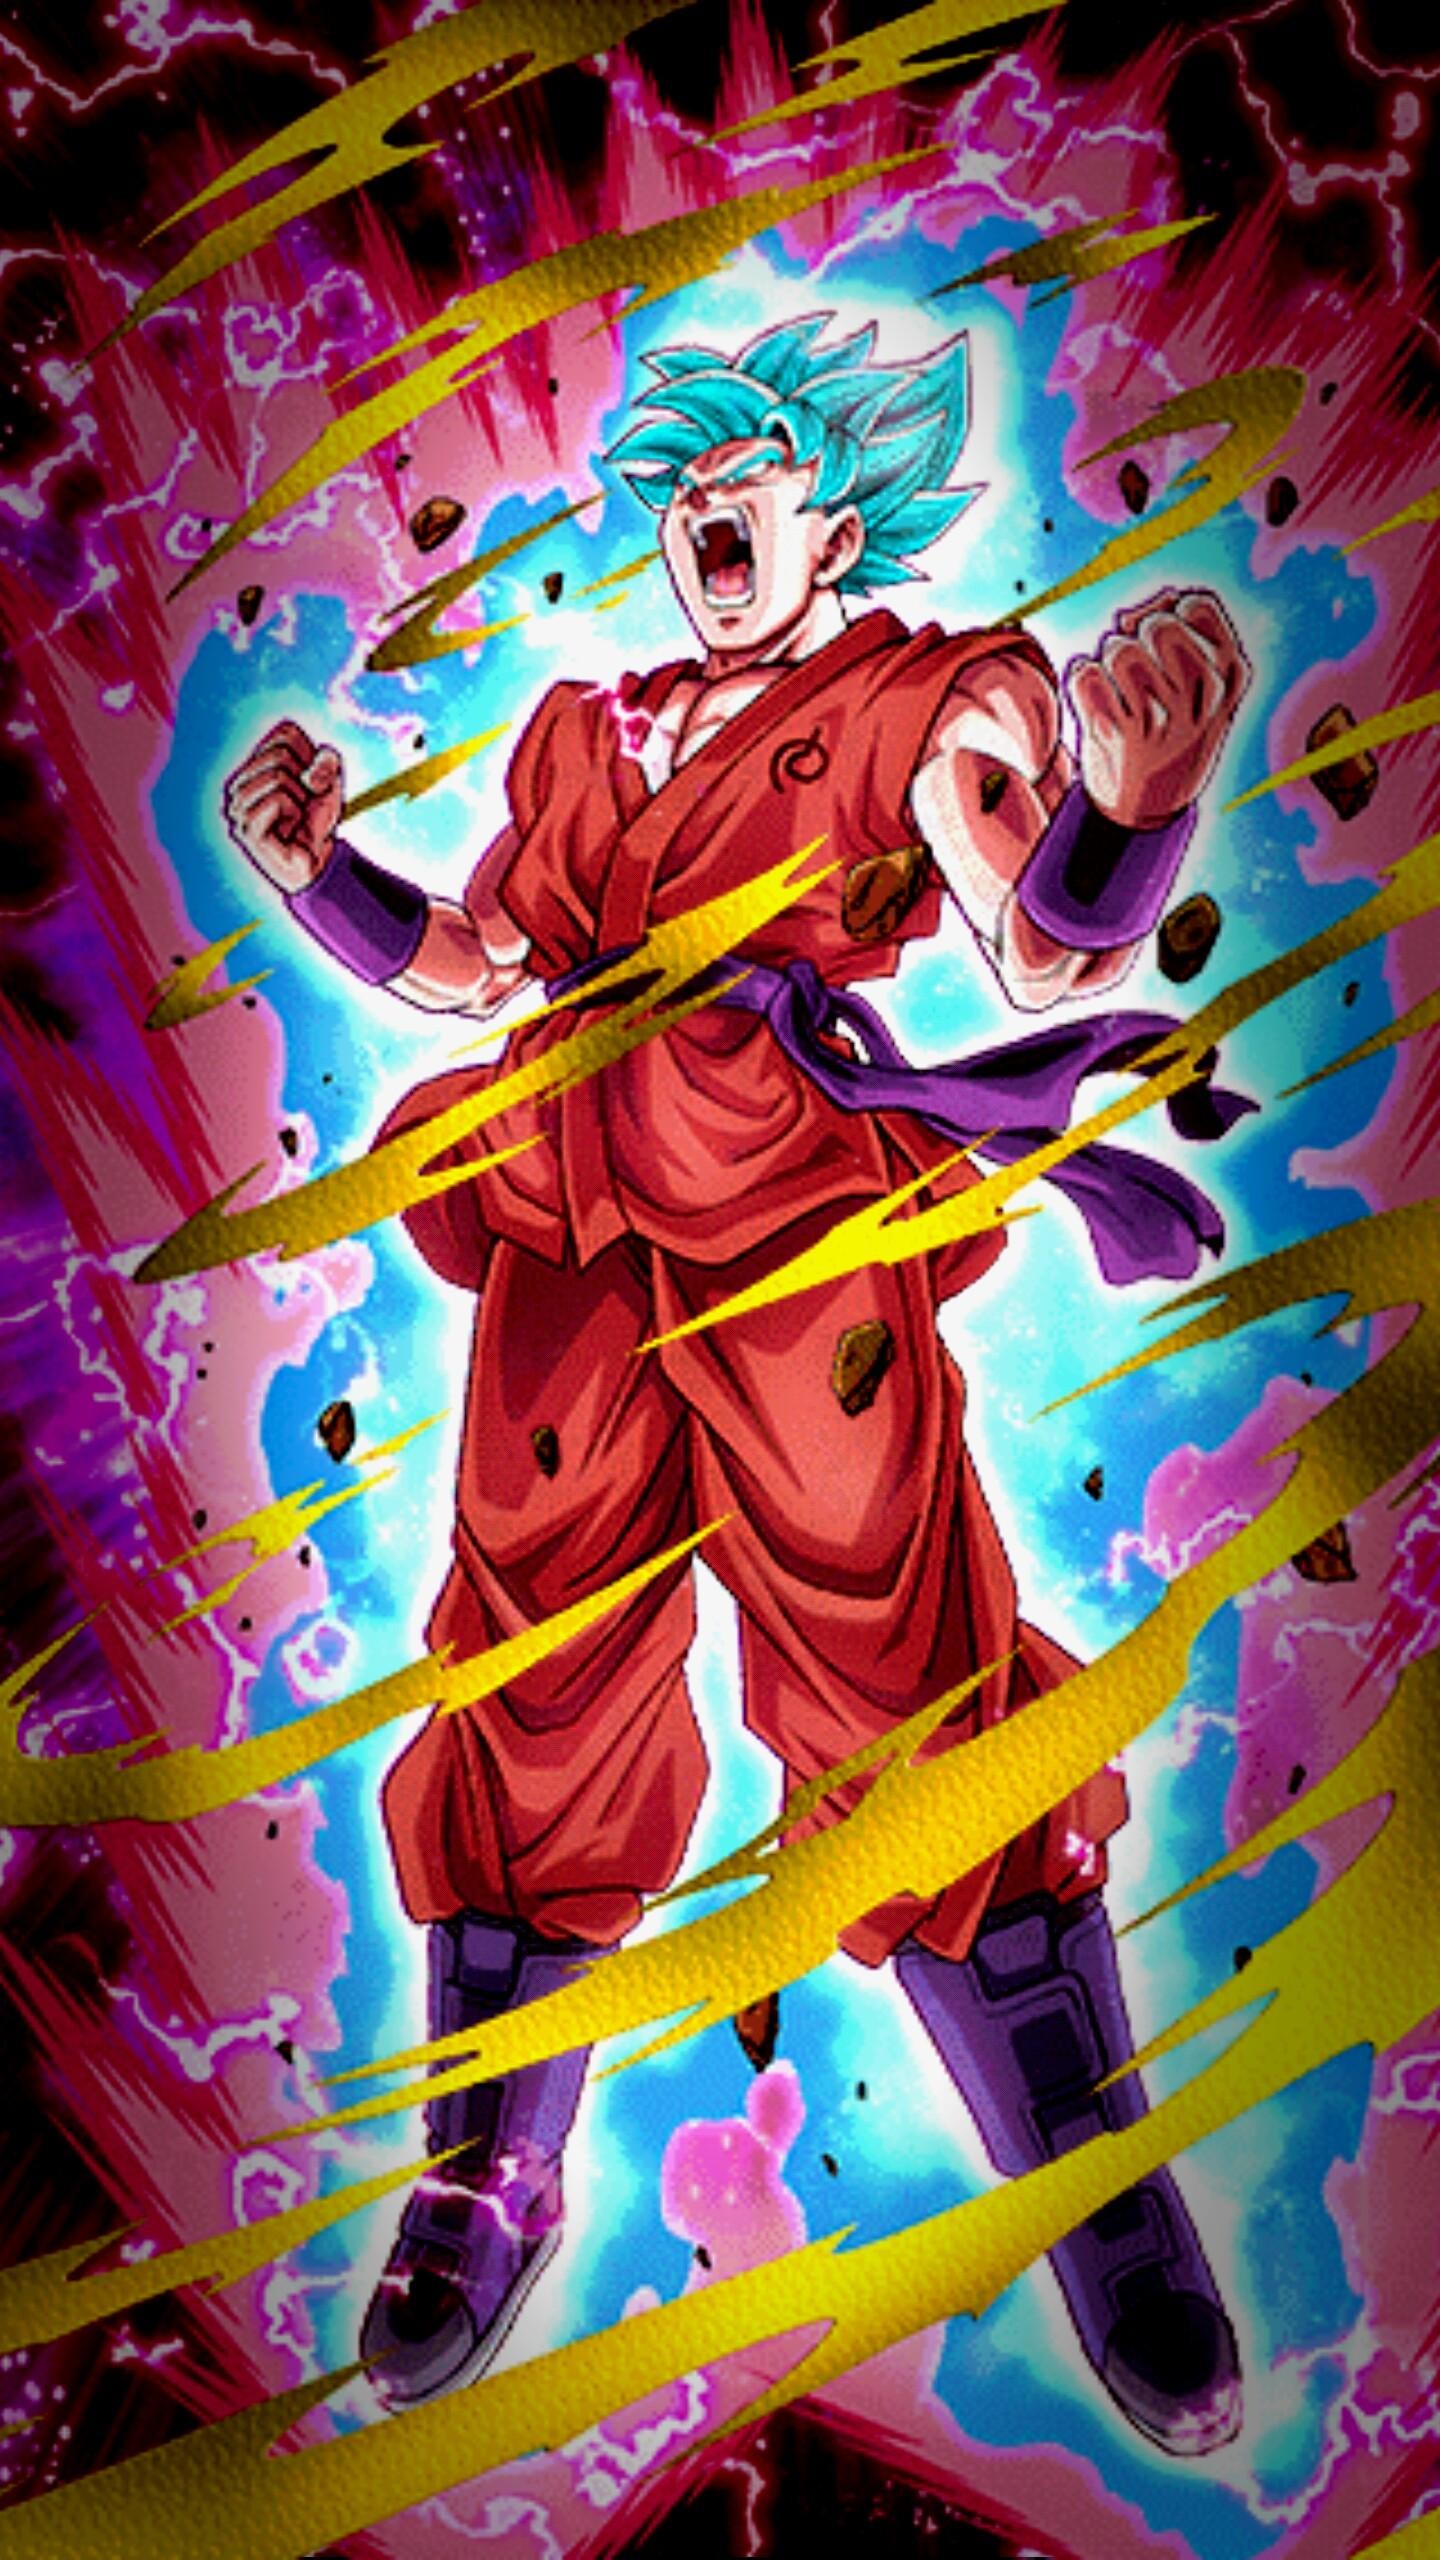 1440x2560 SSBKK Goku wallpaper modded to my liking (maybe yours too?